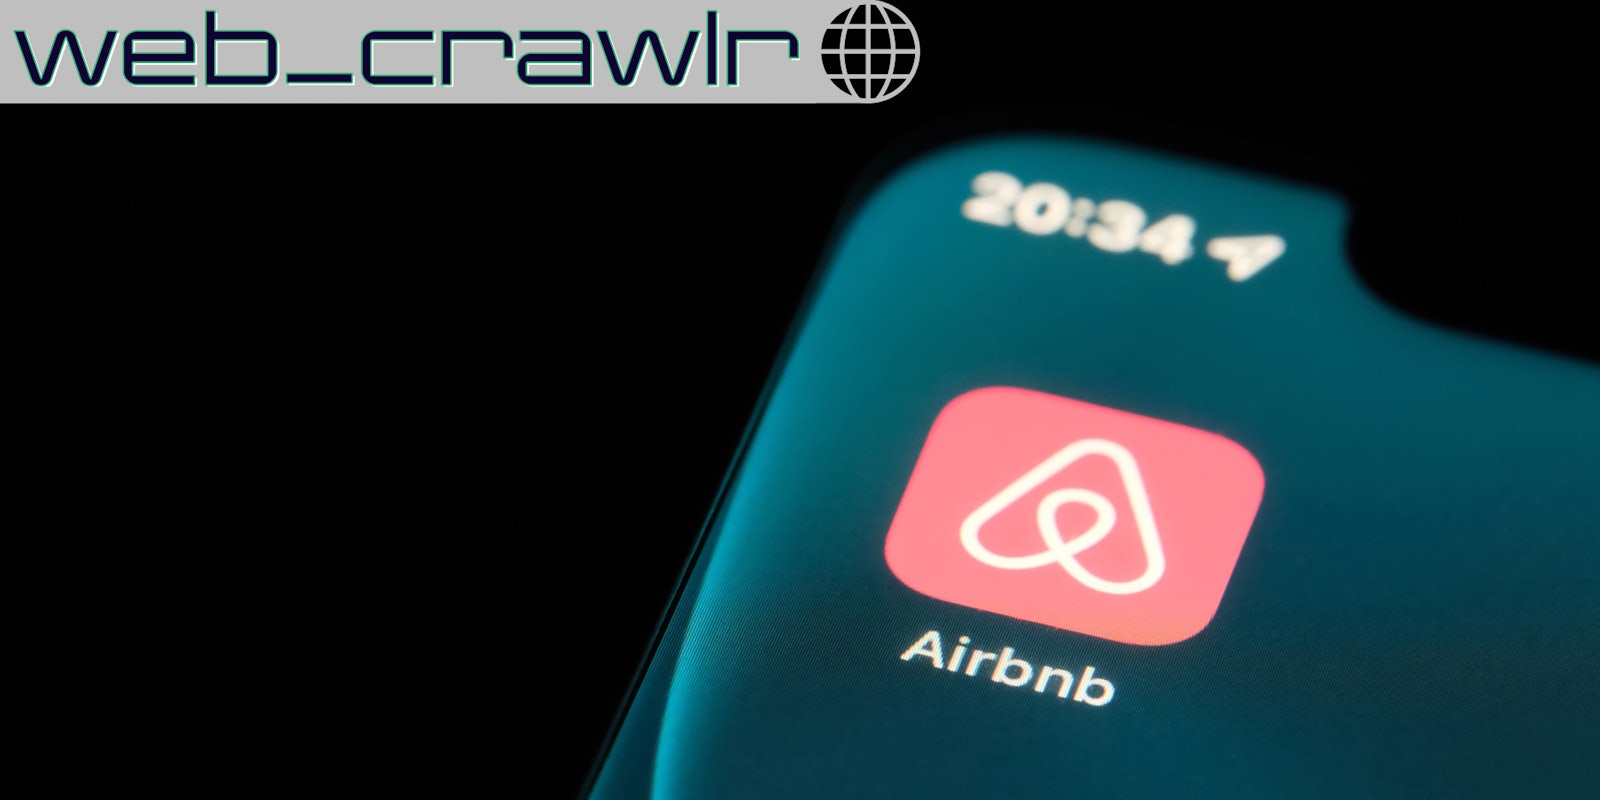 A phone with the Airbnb app on it. The Daily Dot newsletter web_crawlr logo is in the top left corner.